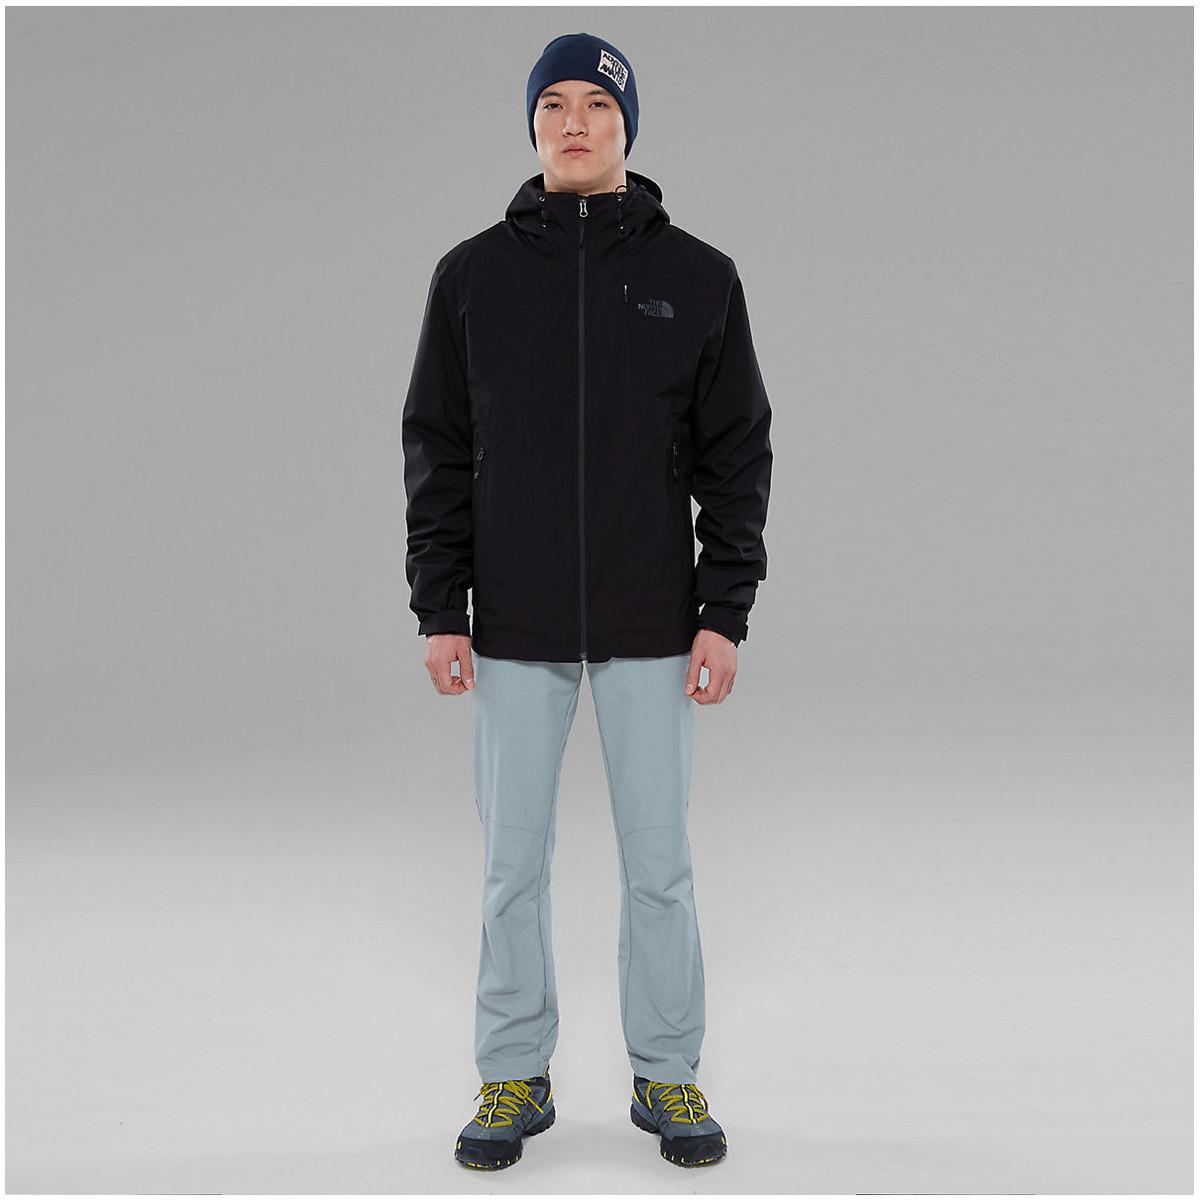 The North Face Naslund Triclimate Flash Sales, 55% OFF | kenyalaw.org